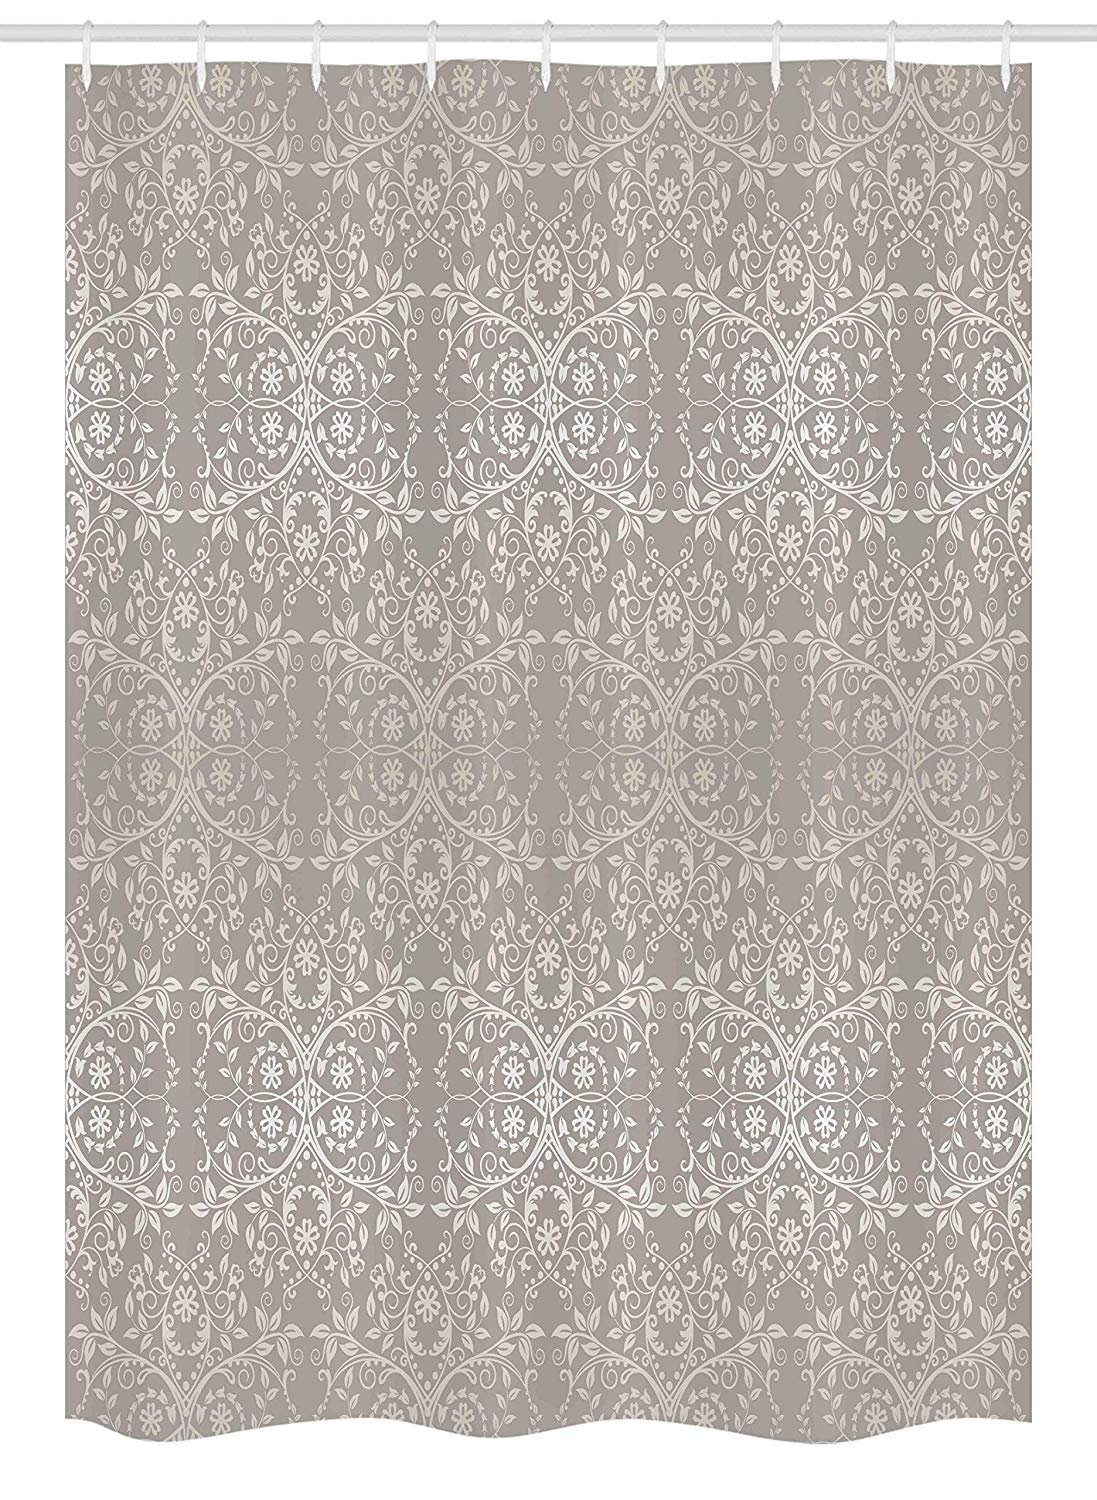 Ambesonne Grey Stall Shower Curtain, Victorian Lace Flowers and Leaves Retro Background Old Fashioned Graphic Print, Fabric Bathroom Decor Set with Hooks, 54 W x 78 L Inches, Warm Taupe Beige